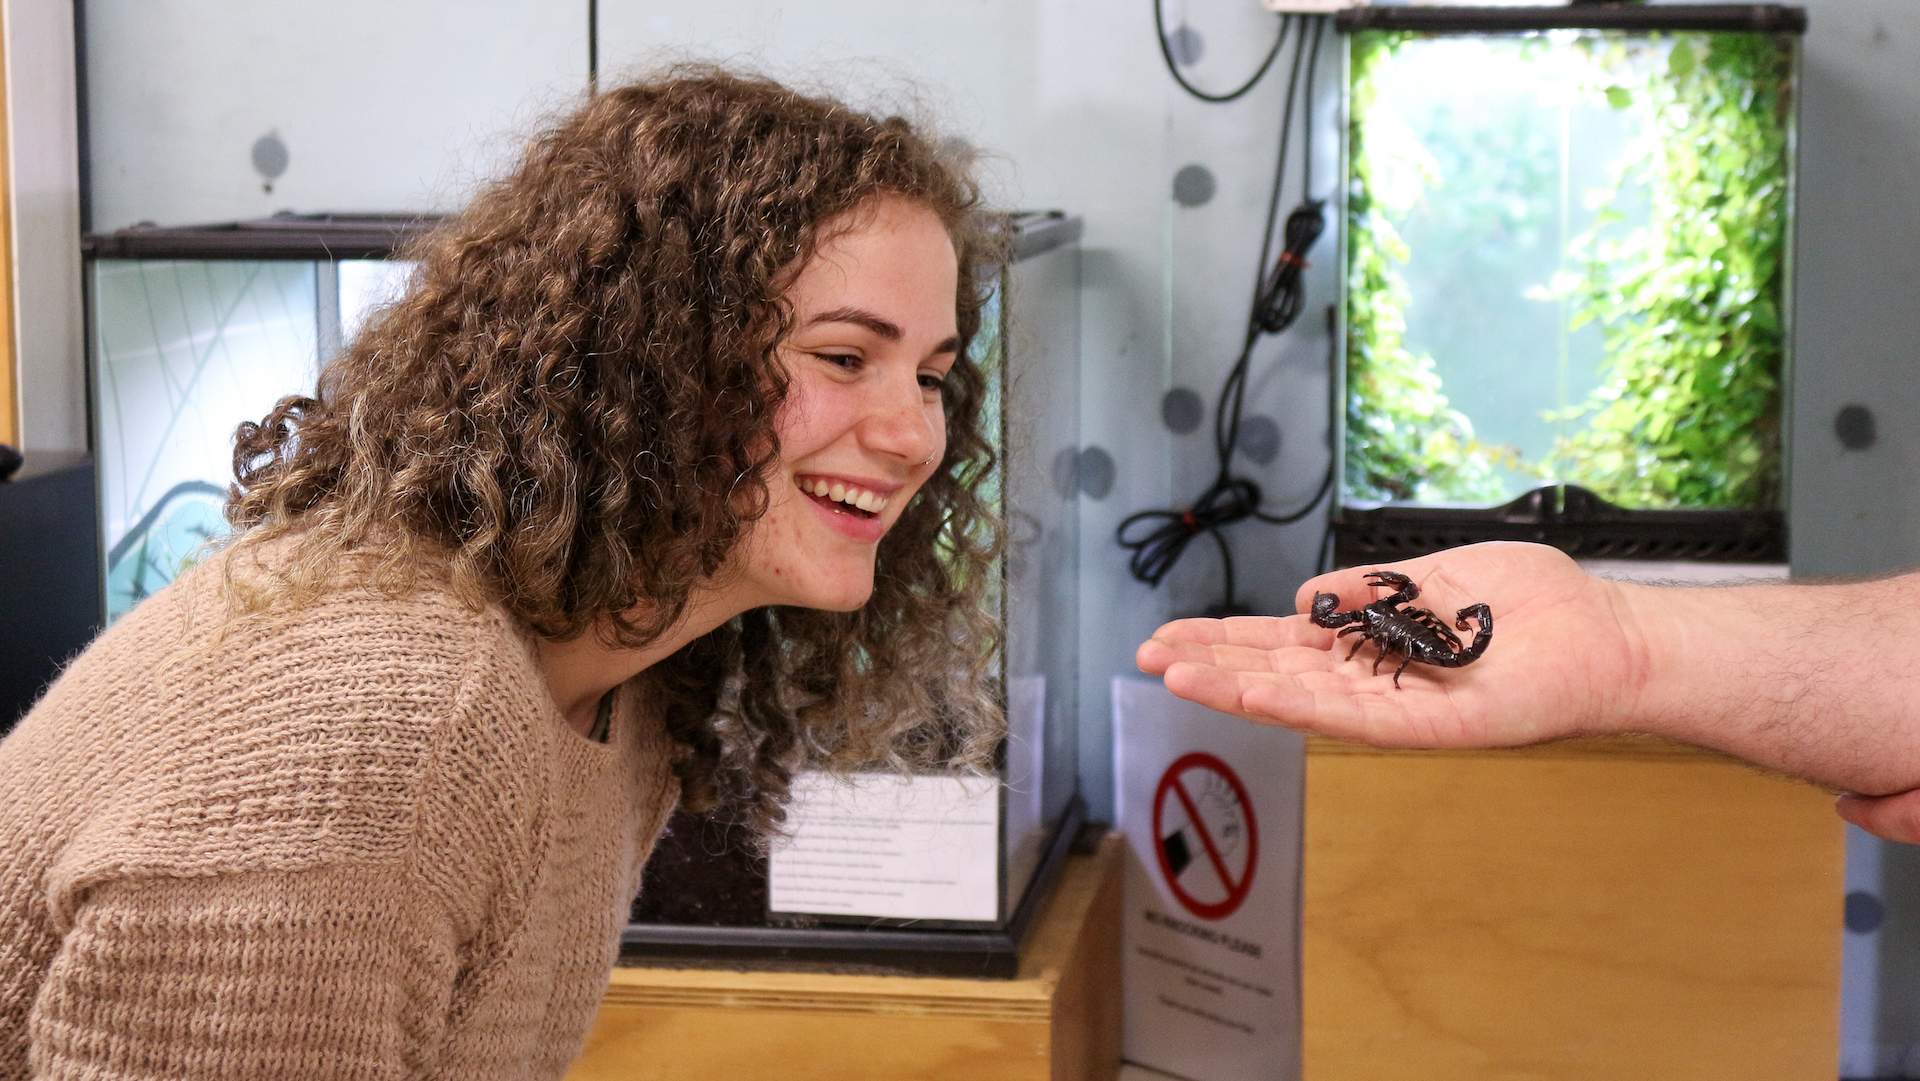 Wellington Zoo's New Behind-the-Scenes Experience Lets You Get Up Close with Creepy Crawlies